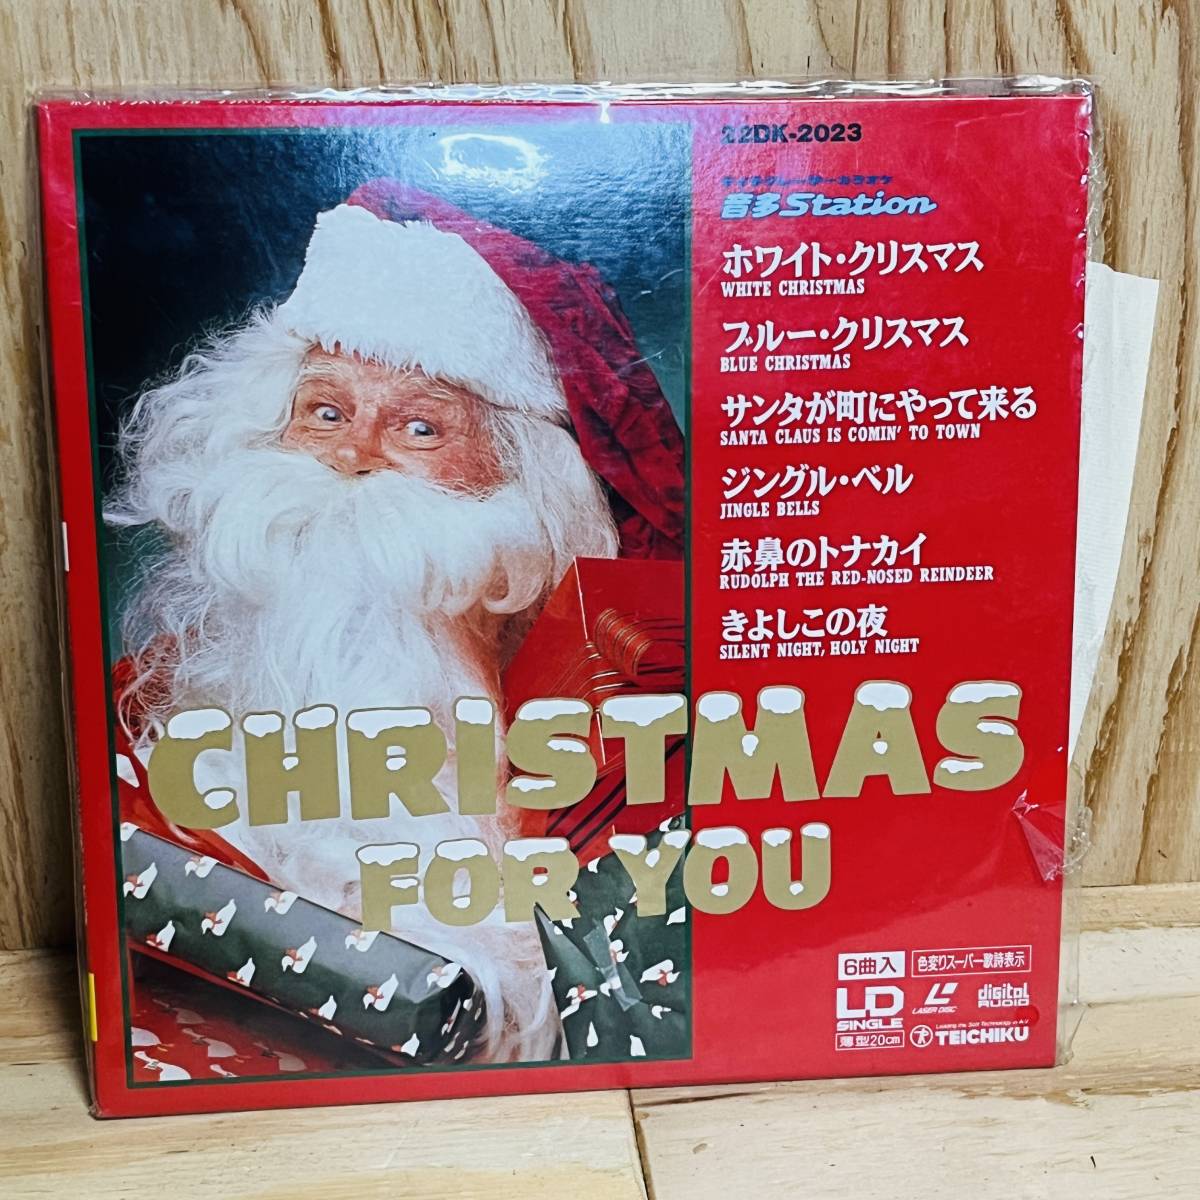 [LDs] Tey chik Laser karaoke Christmas four You sound many station USED beautiful goods ( record surface / jacket : NM/NM) Yu-Mail 185 jpy 